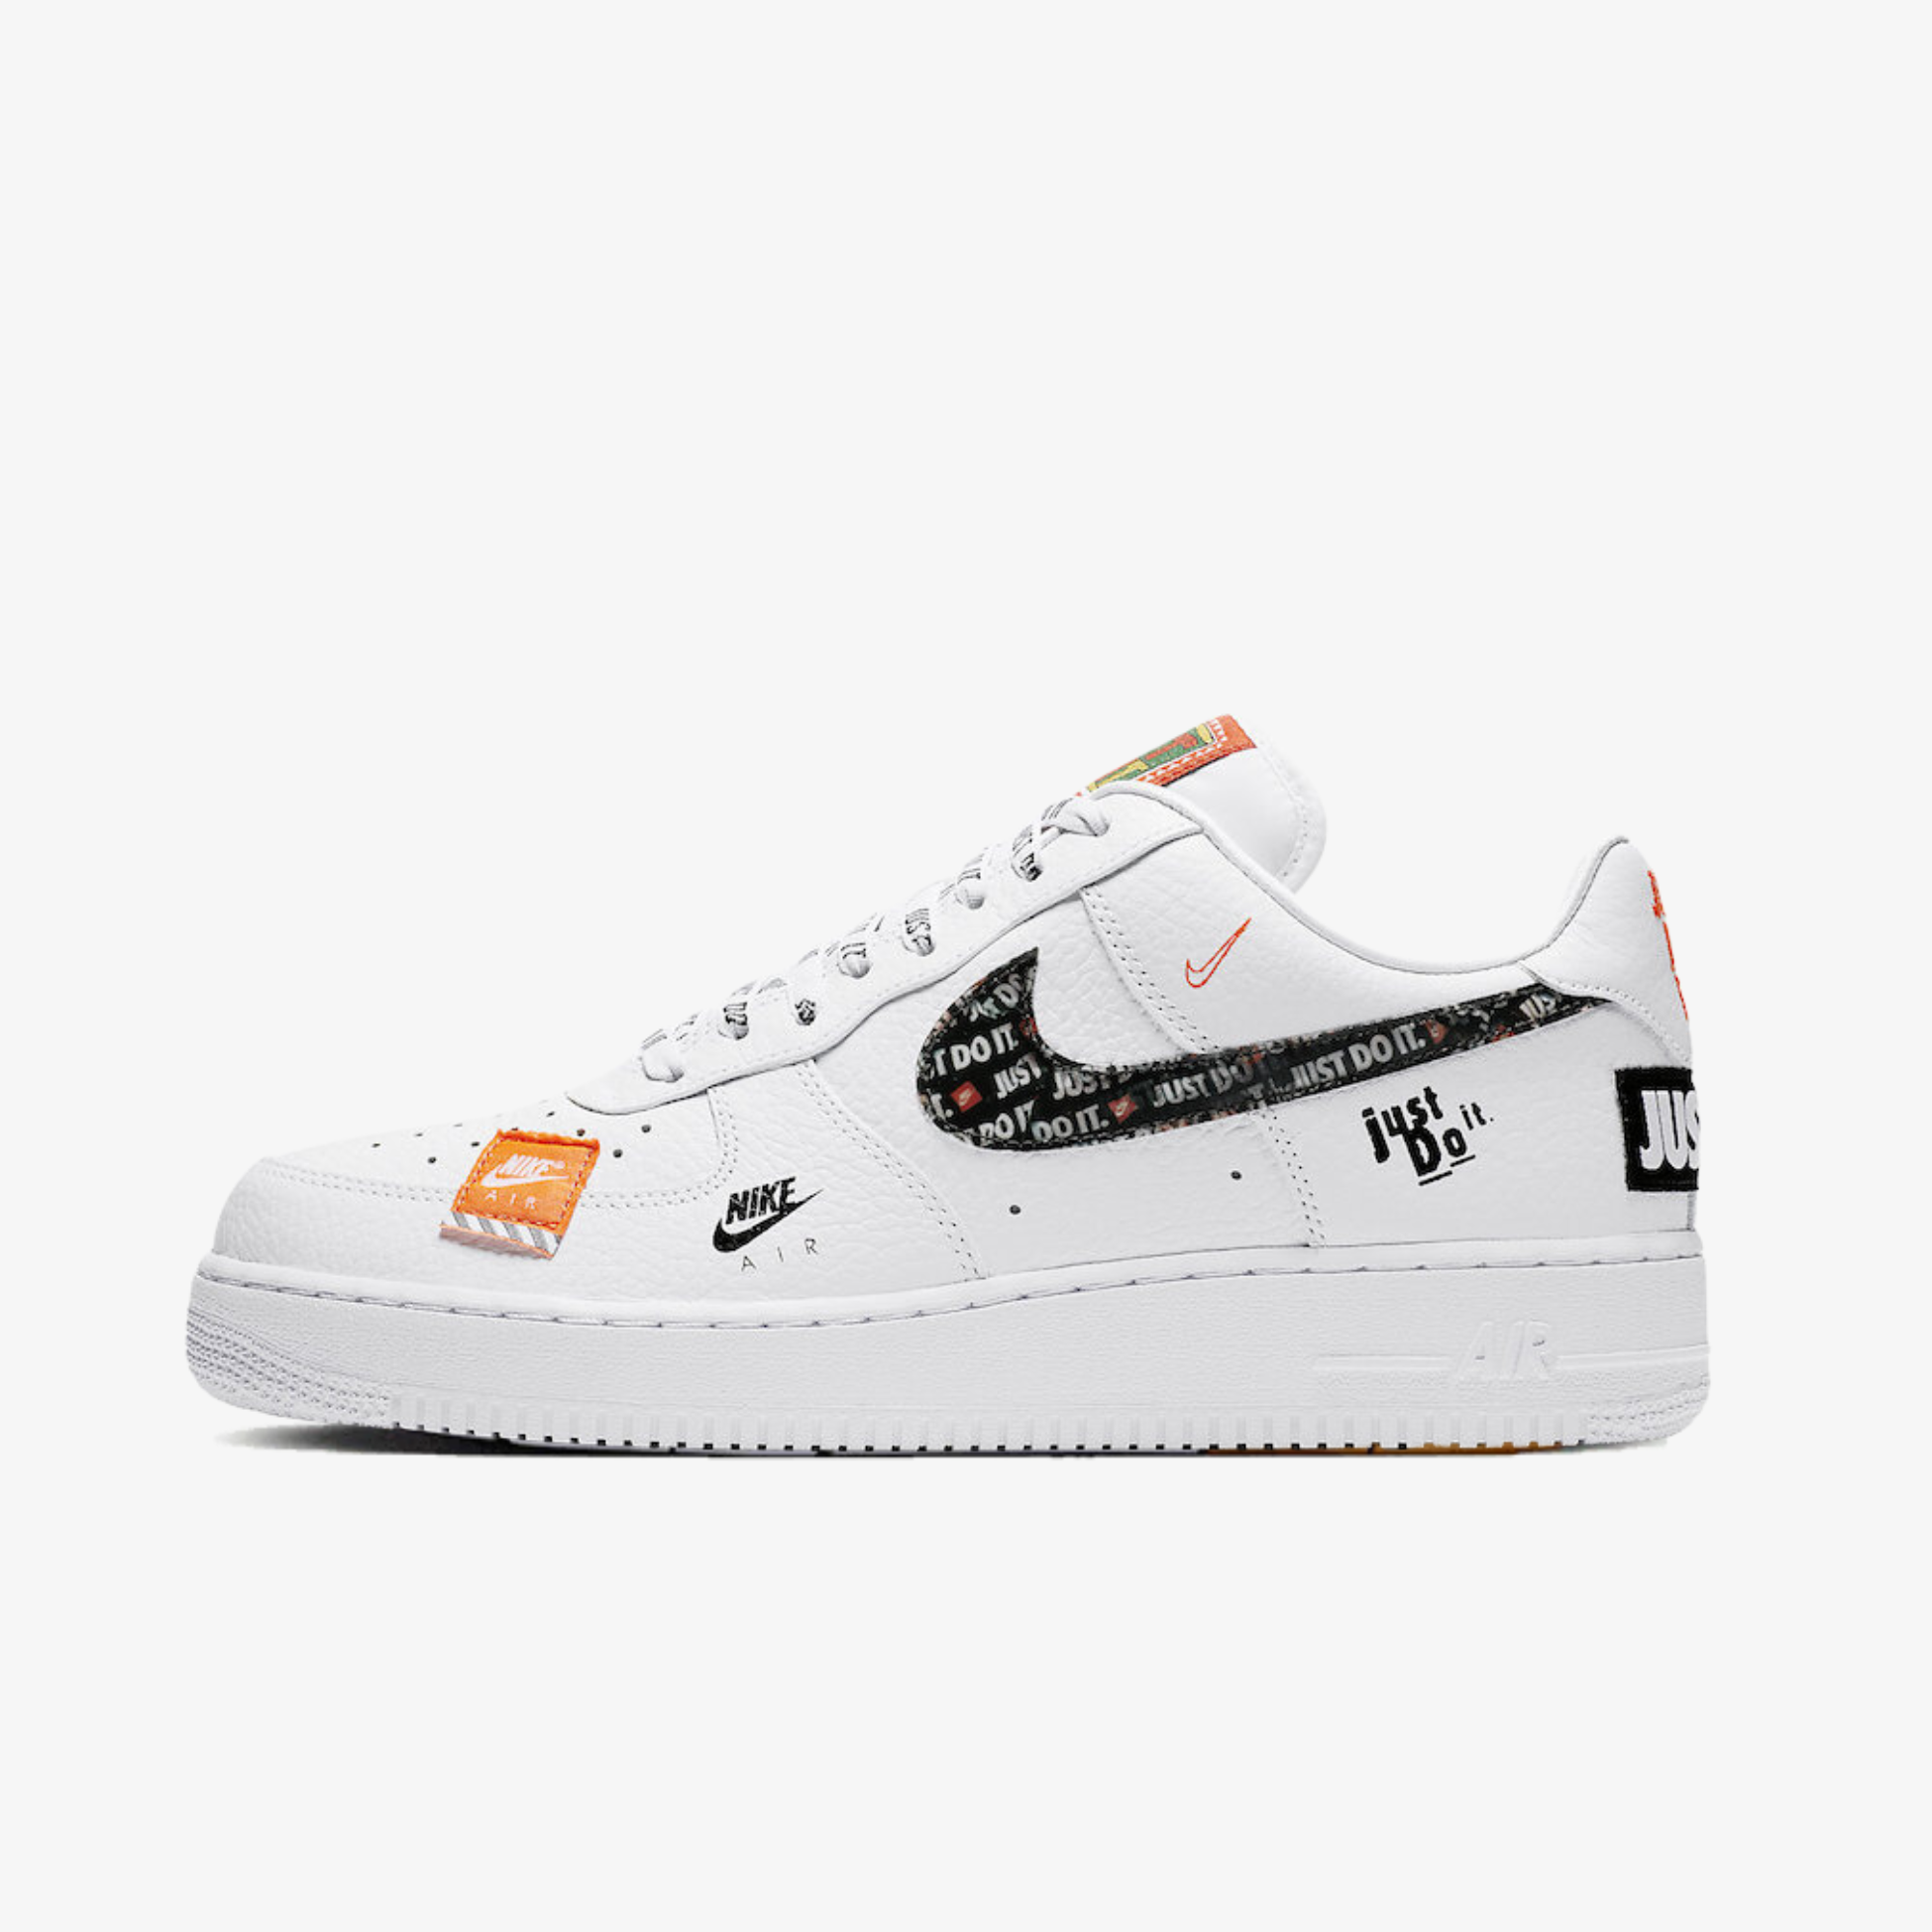 Nike Air Force 1 '07 PRM "Just Do It" Blanc